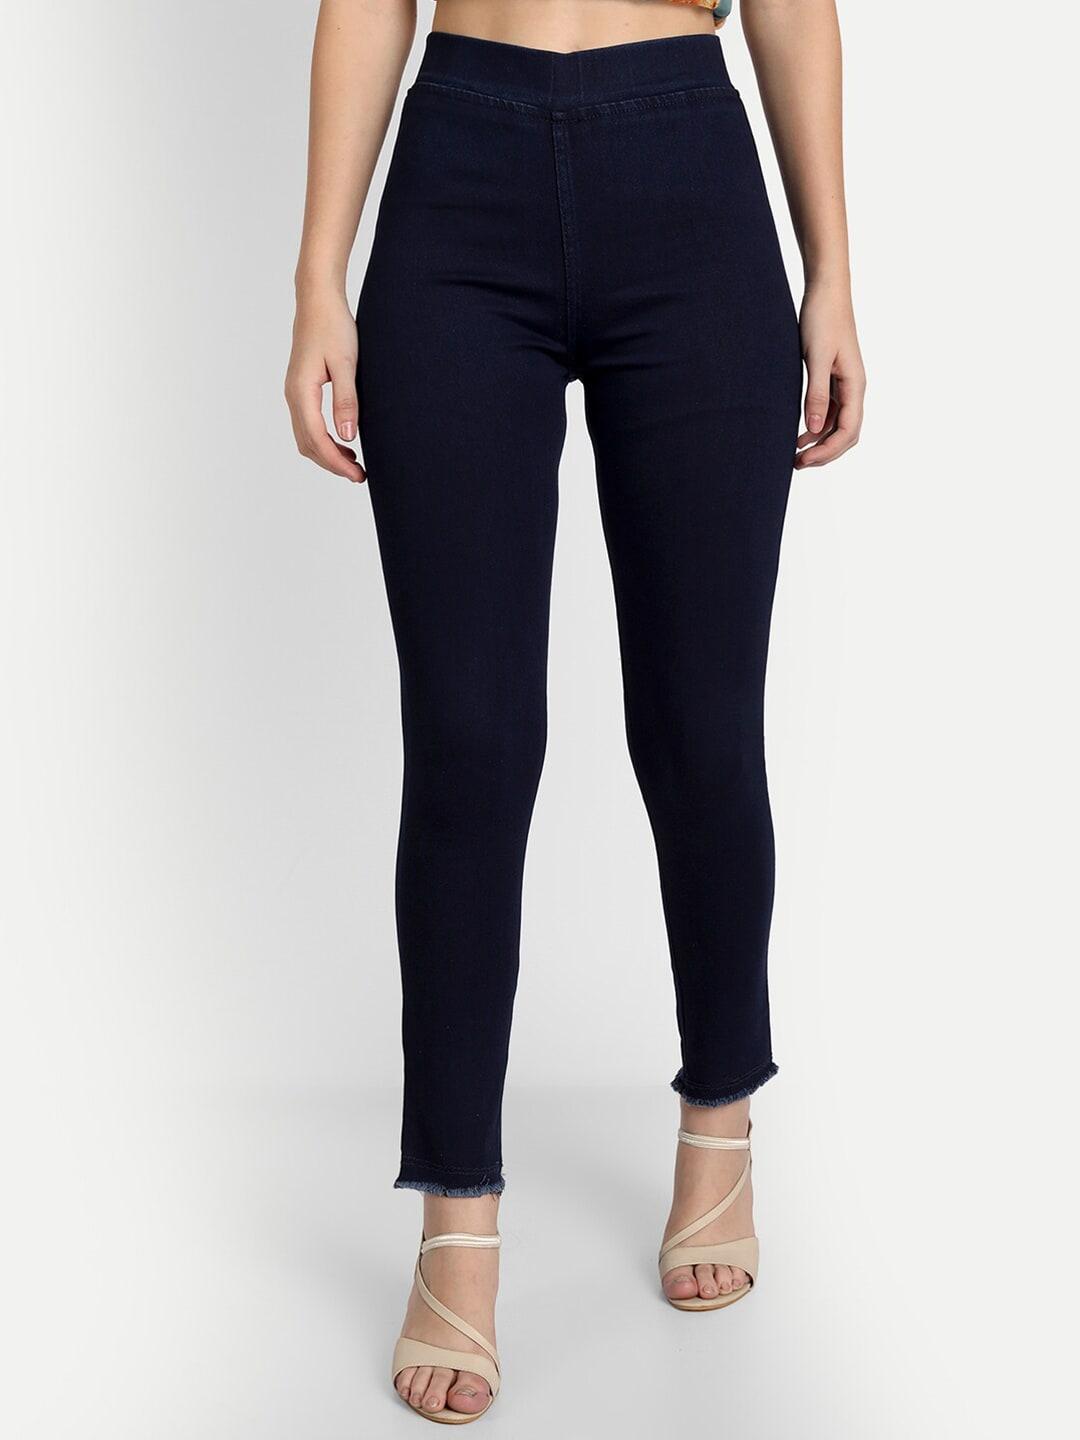 angelfab-women-cotton-mid-rise-jeggings